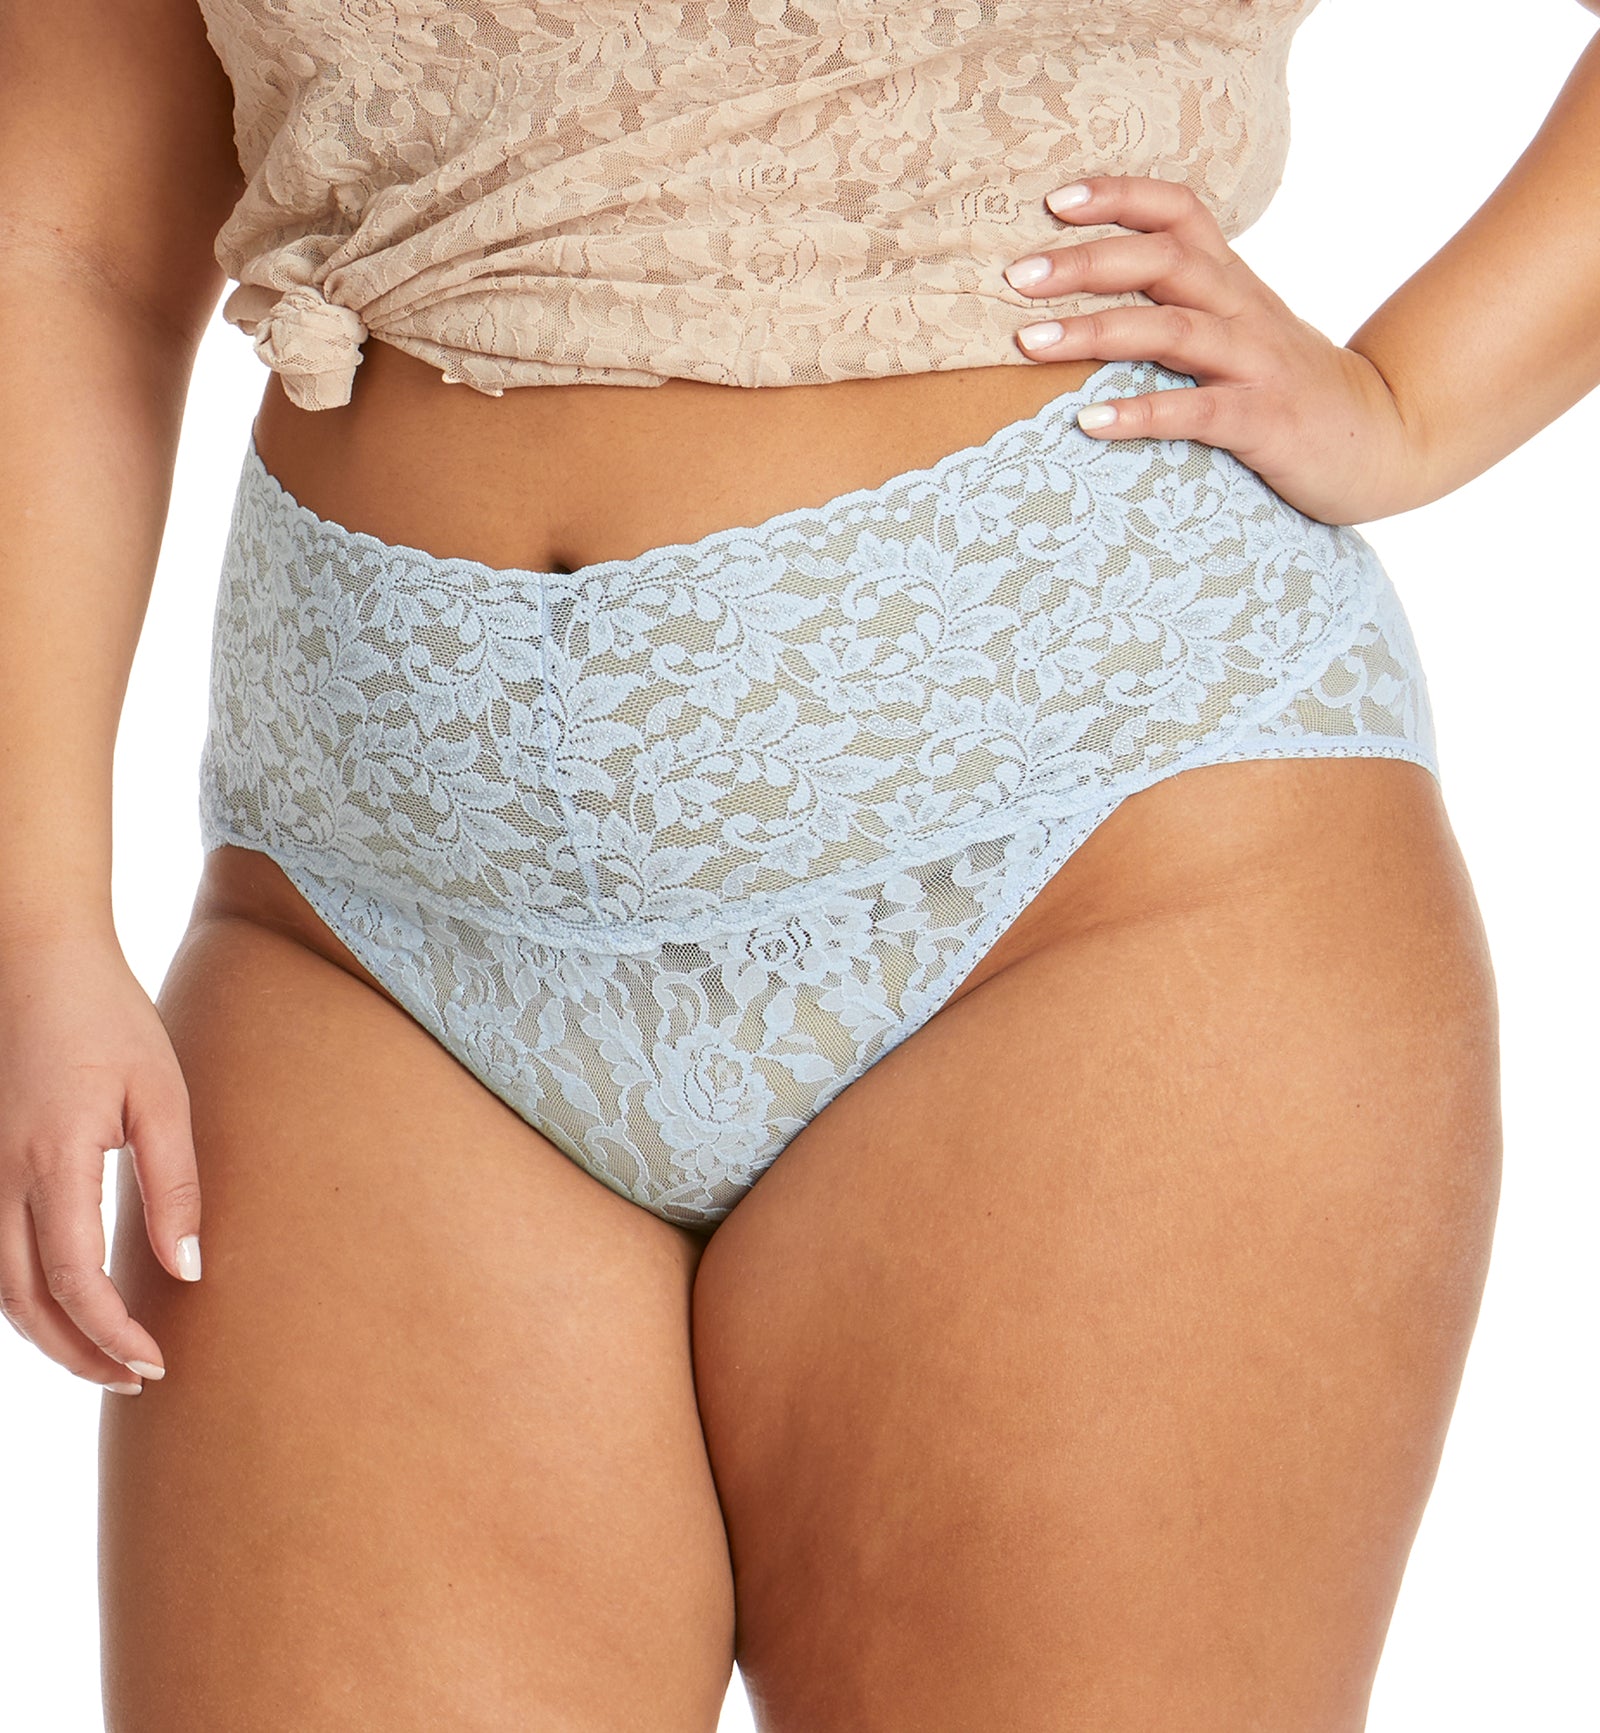 Hanky Panky Retro Lace V-kini PLUS (9K2124X),1X,Partly Cloudy - Partly Cloudy,1X